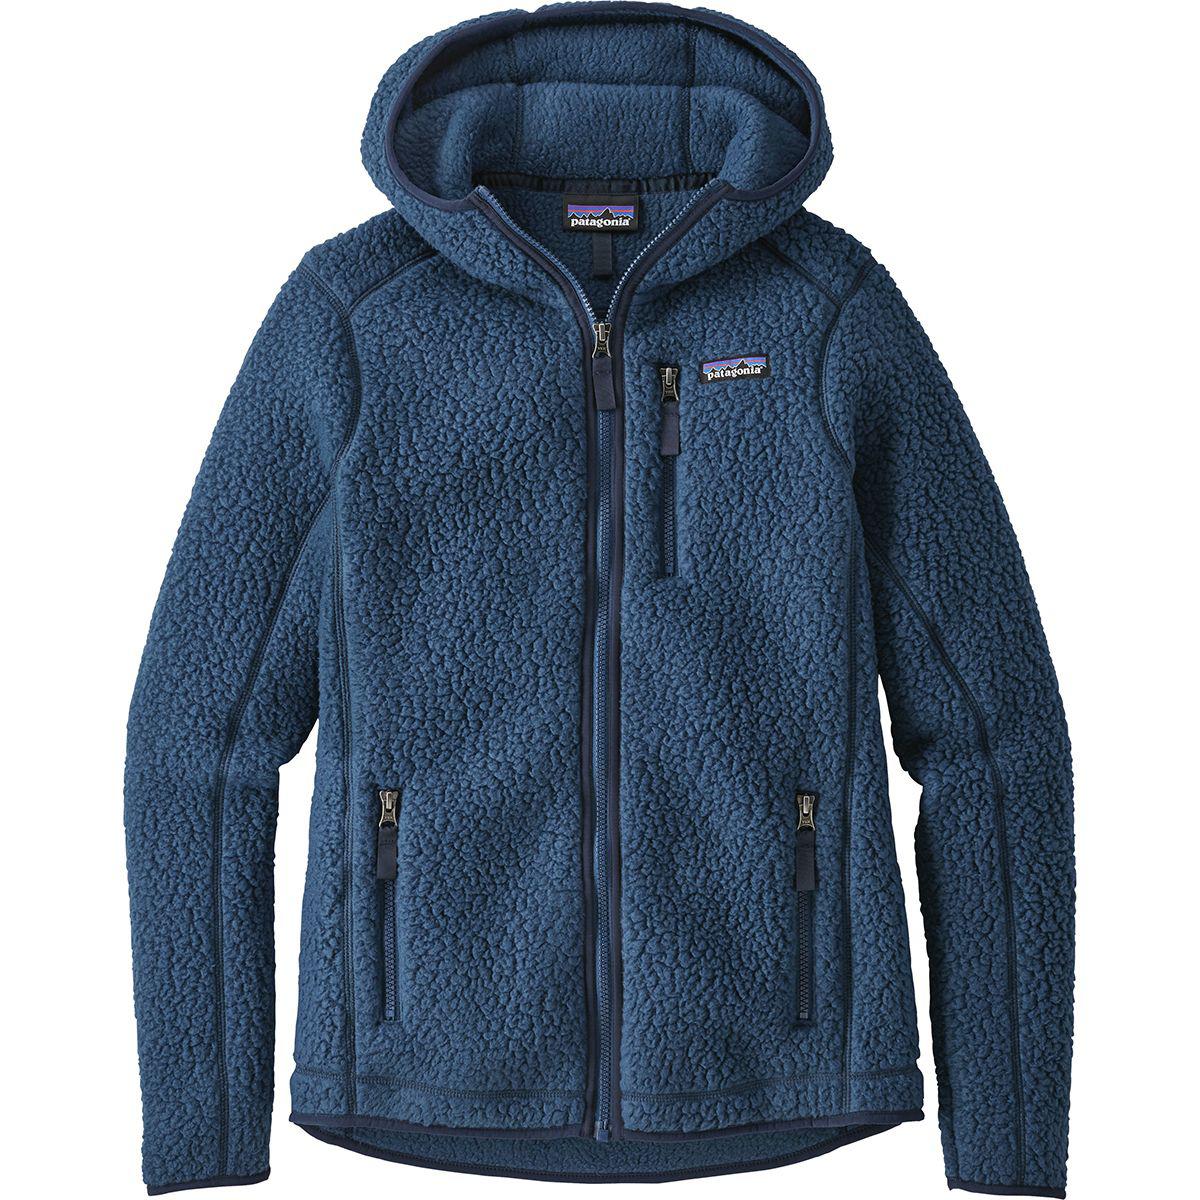 Patagonia Fleece Retro Pile Hooded Jacket in Stone Blue (Blue) - Lyst